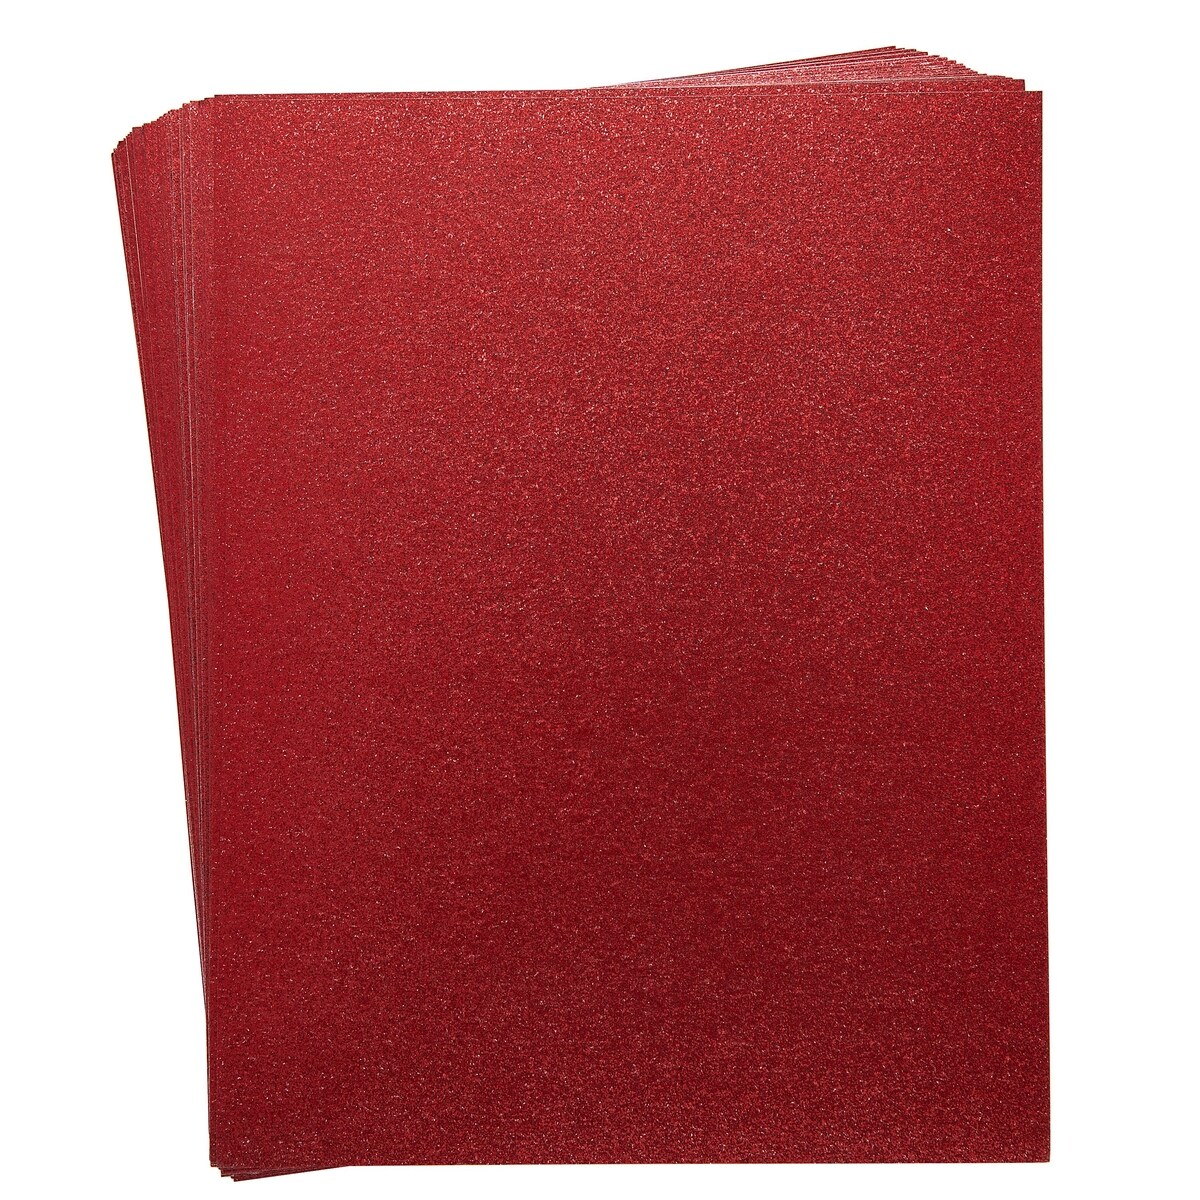 30 Sheets Red Glitter Cardstock Paper for DIY Crafts, Card Making